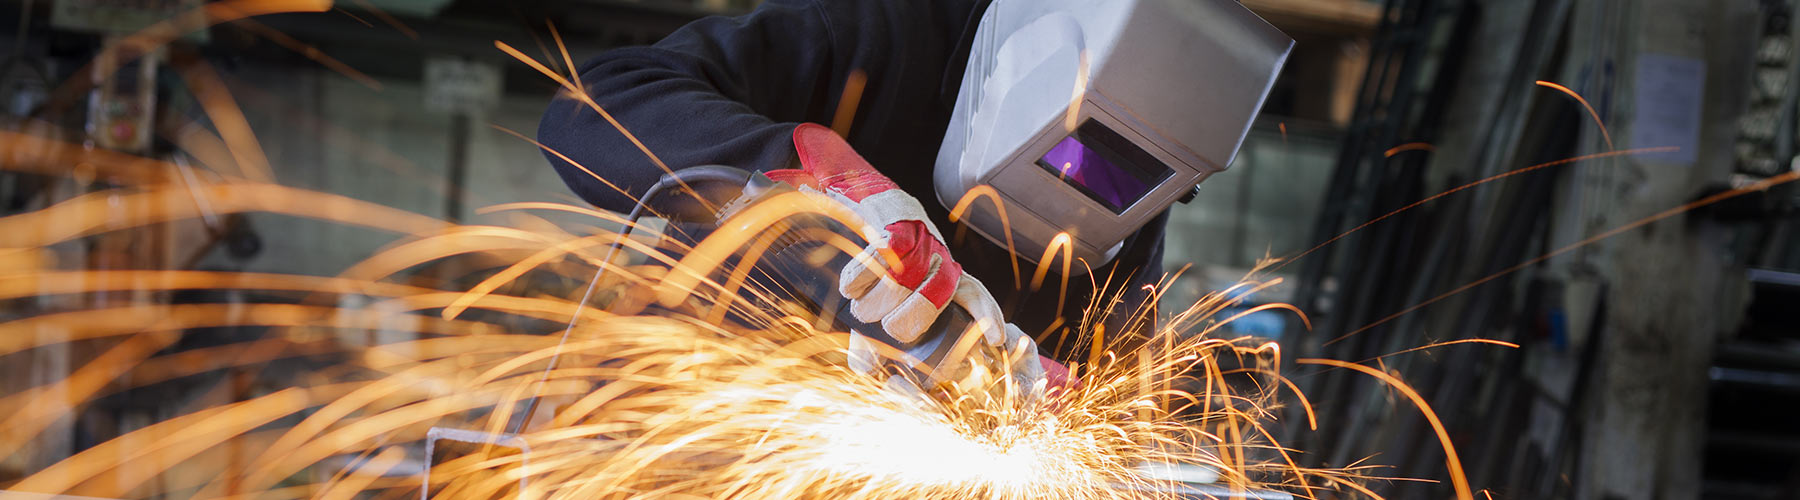 Metal working grinding with sparks 